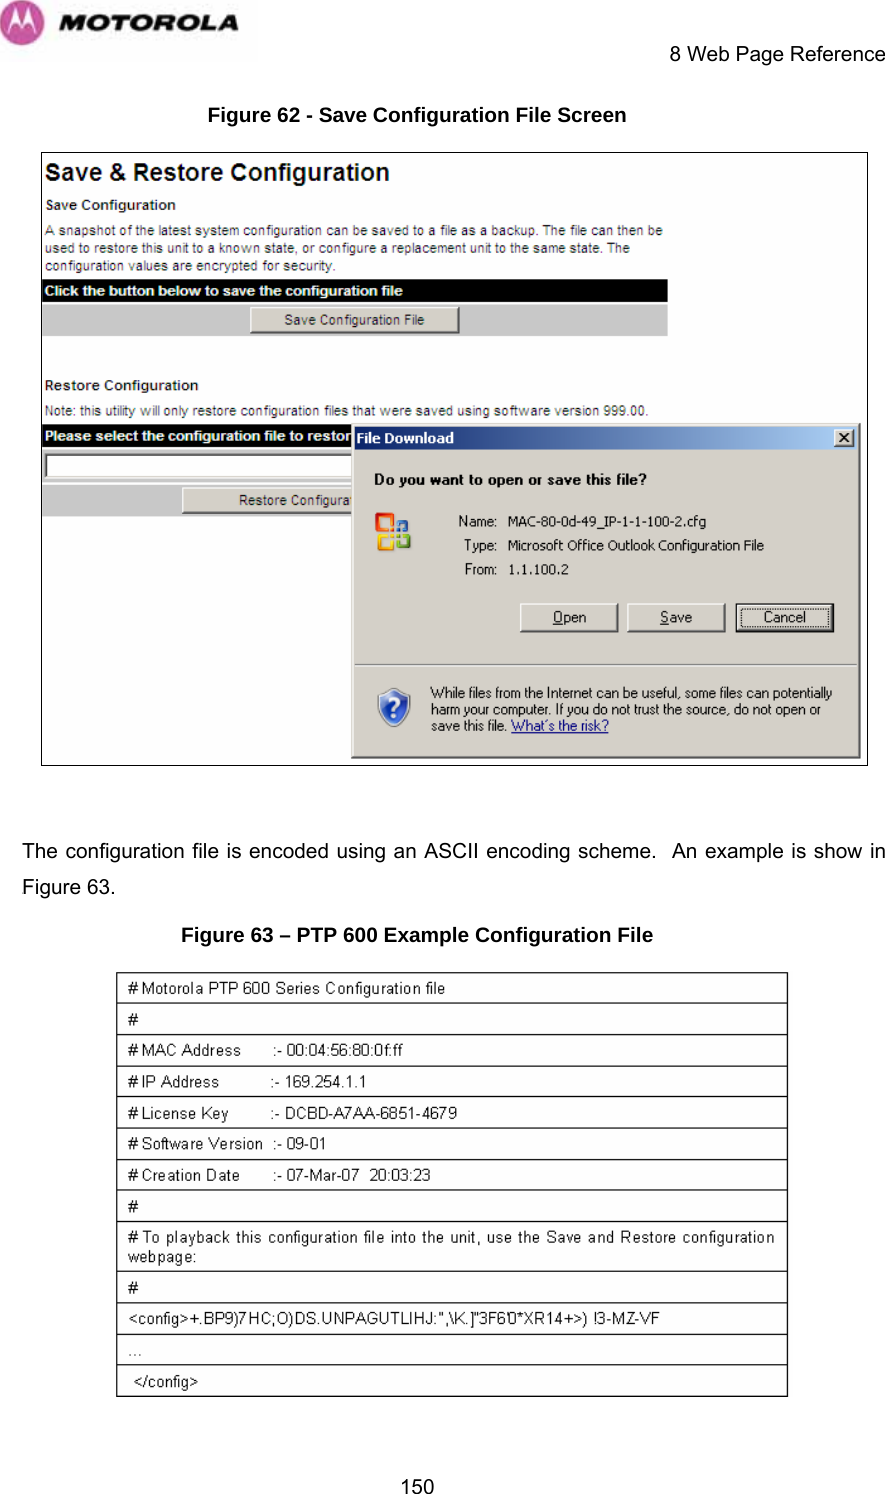     8 Web Page Reference  150Figure 62 - Save Configuration File Screen   The configuration file is encoded using an ASCII encoding scheme.  An example is show in 1Figure 63. Figure 63 – PTP 600 Example Configuration File  